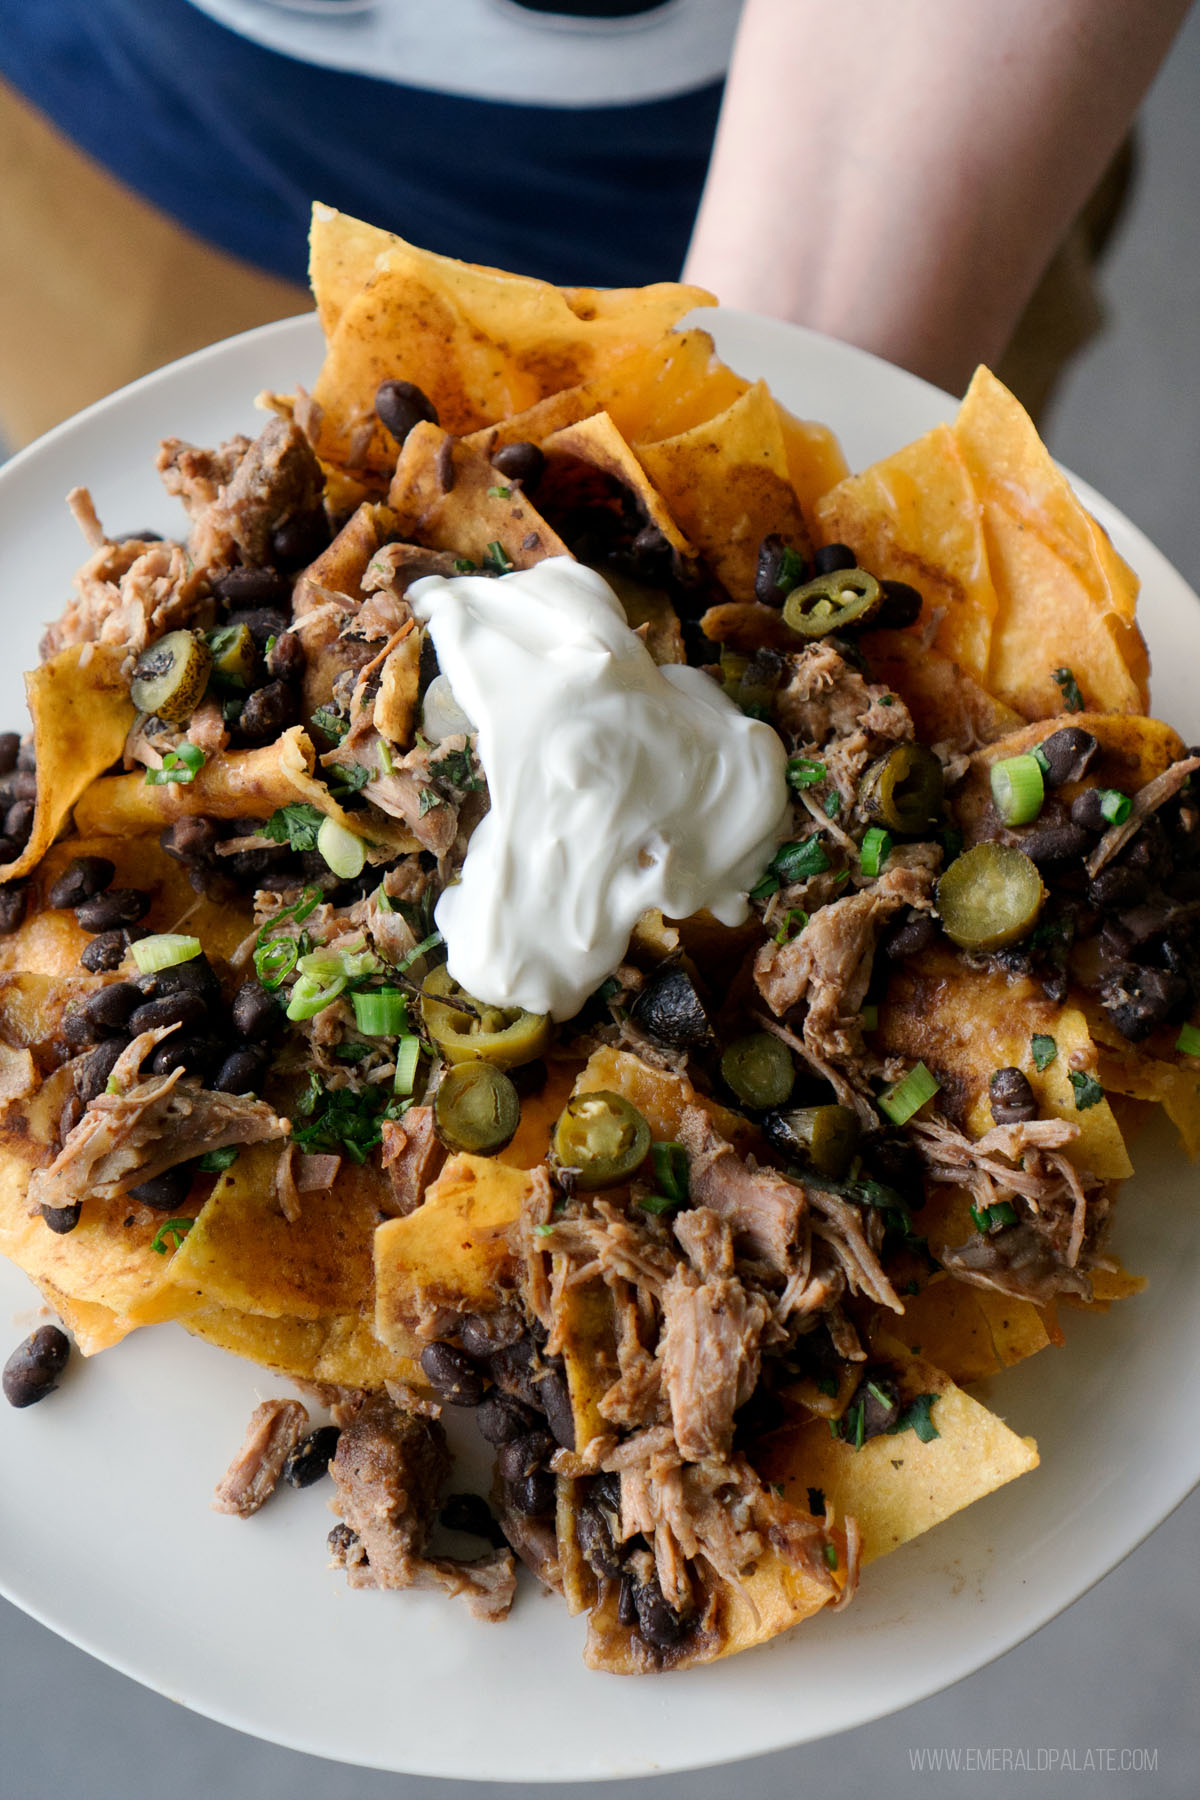 nachos topped with pulled pork, black beans, corn, and sour cream